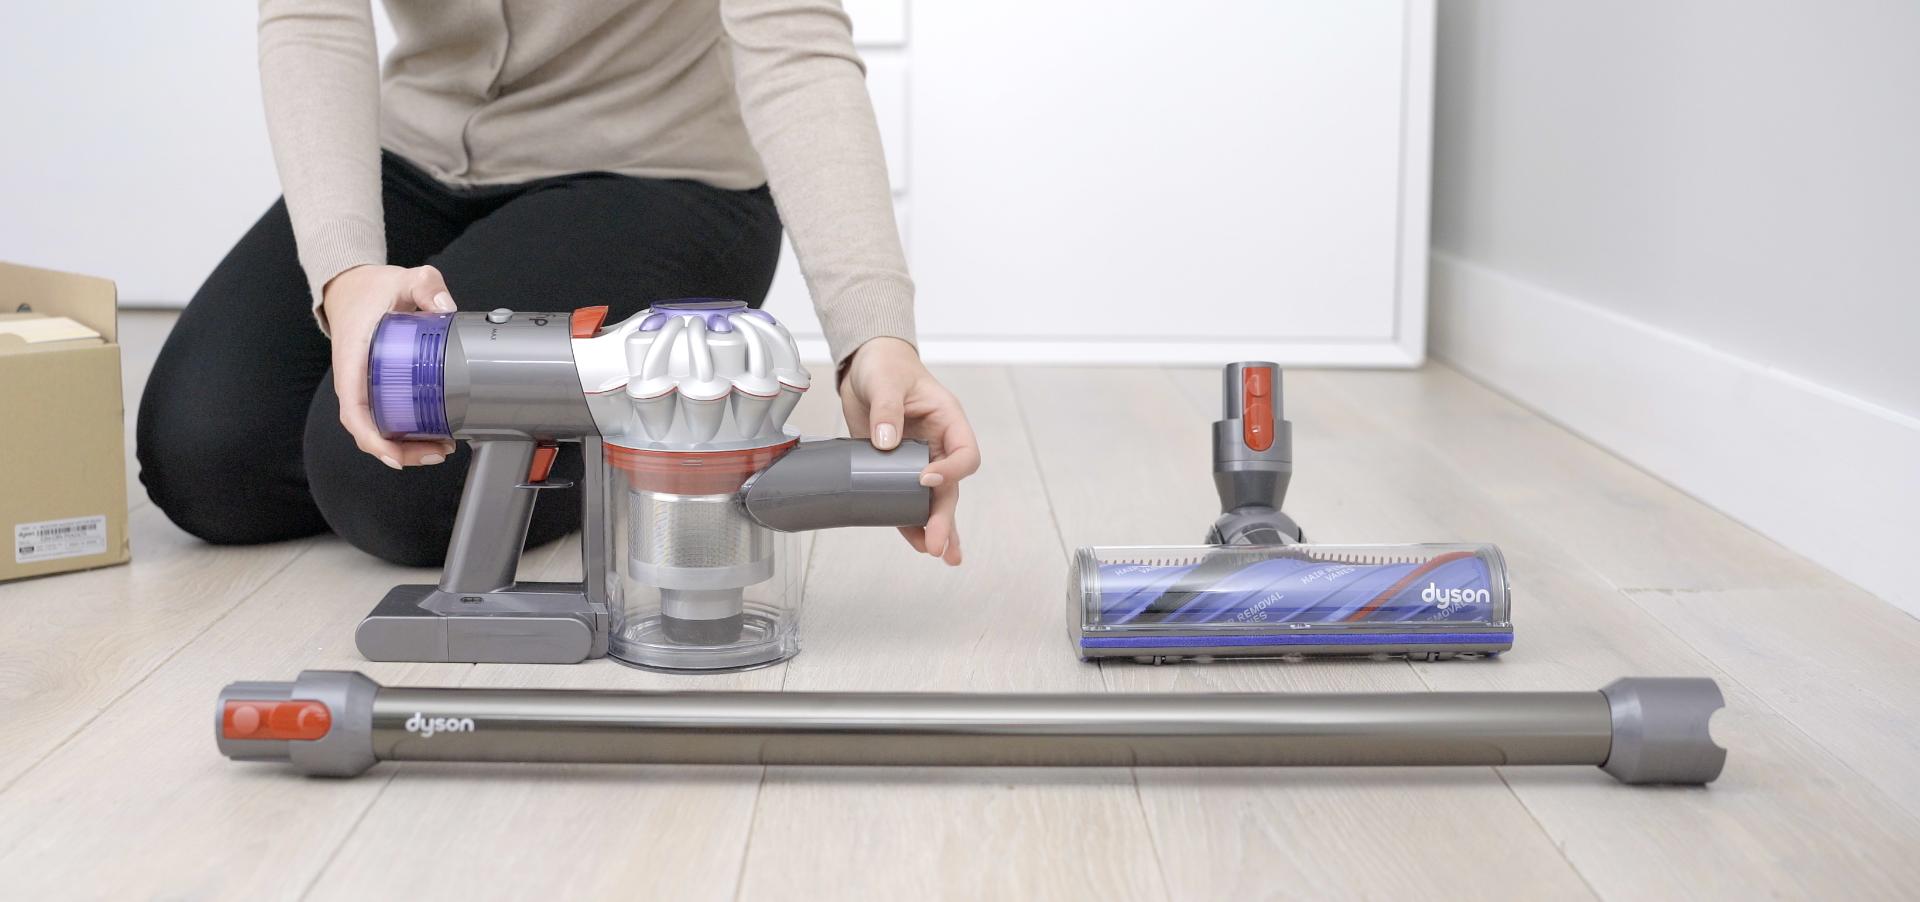 Quick-start video on setting up your Dyson V7 Advanced